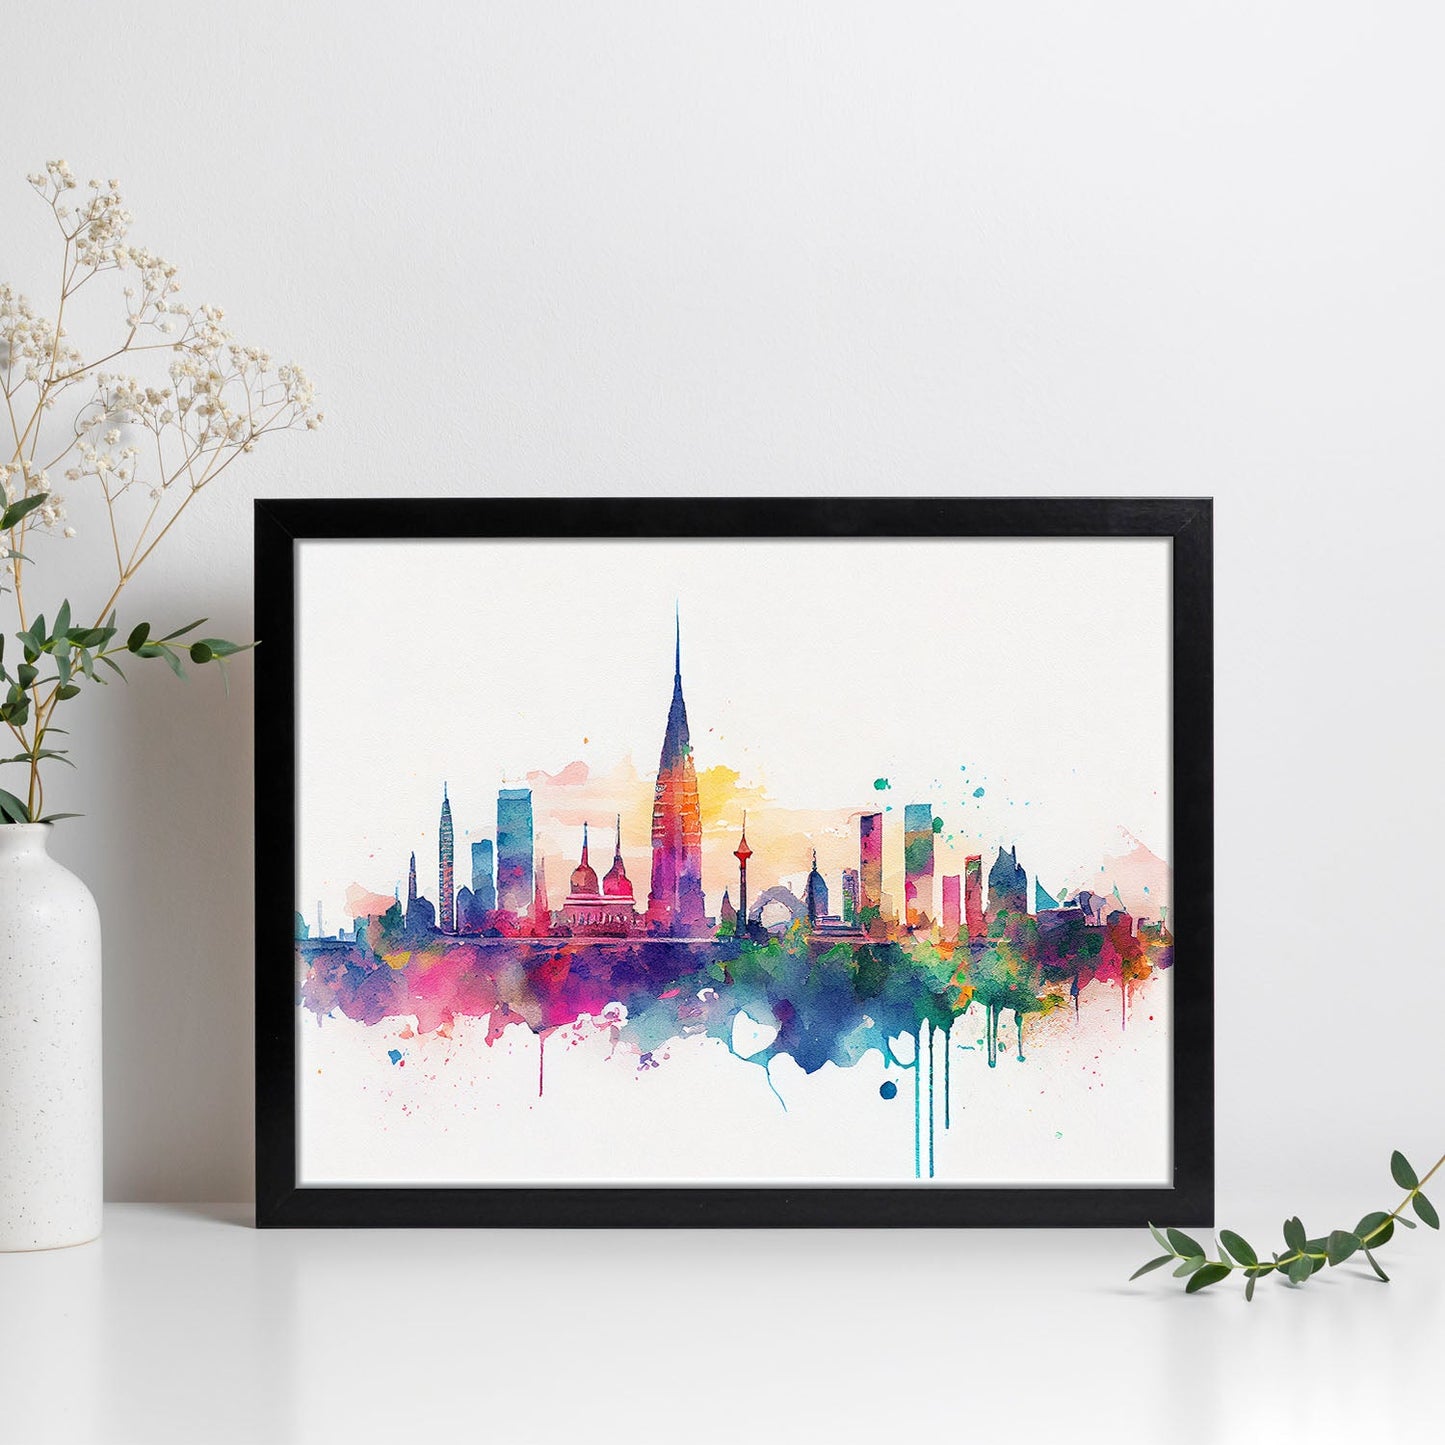 Nacnic watercolor of a skyline of the city of Bangkok. Aesthetic Wall Art Prints for Bedroom or Living Room Design.-Artwork-Nacnic-A4-Sin Marco-Nacnic Estudio SL